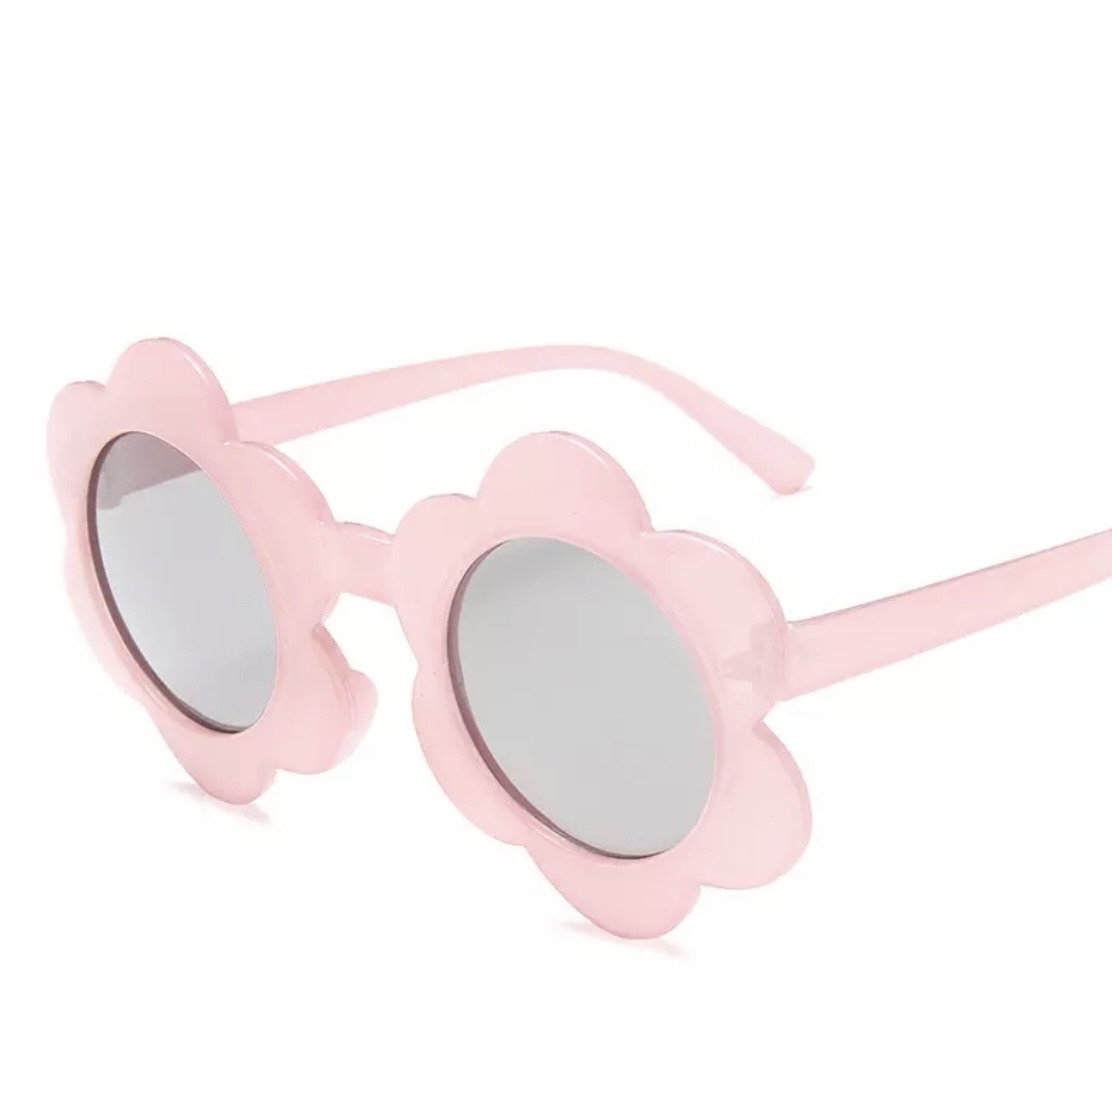 Flower Sonnenbrille find Stylish Fashion for Little People- at Little Foxx Concept Store